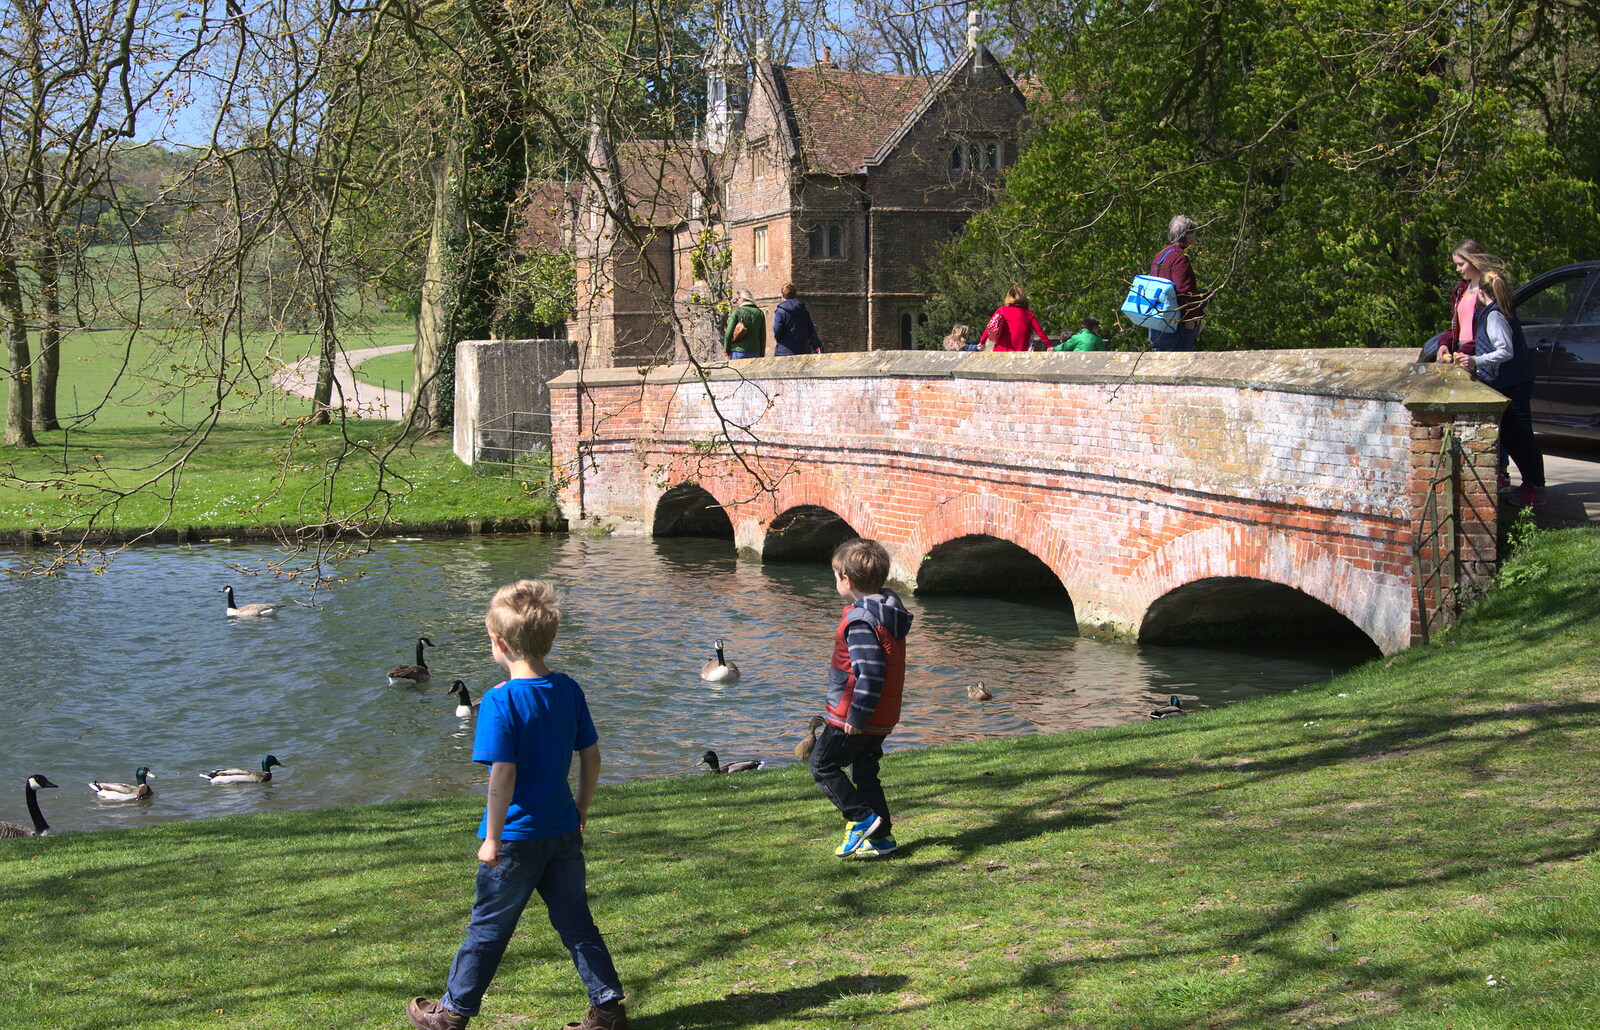 Fred and Kane go to see the ducks from A Trip to Audley End House, Saffron Walden, Essex - 16th April 2014